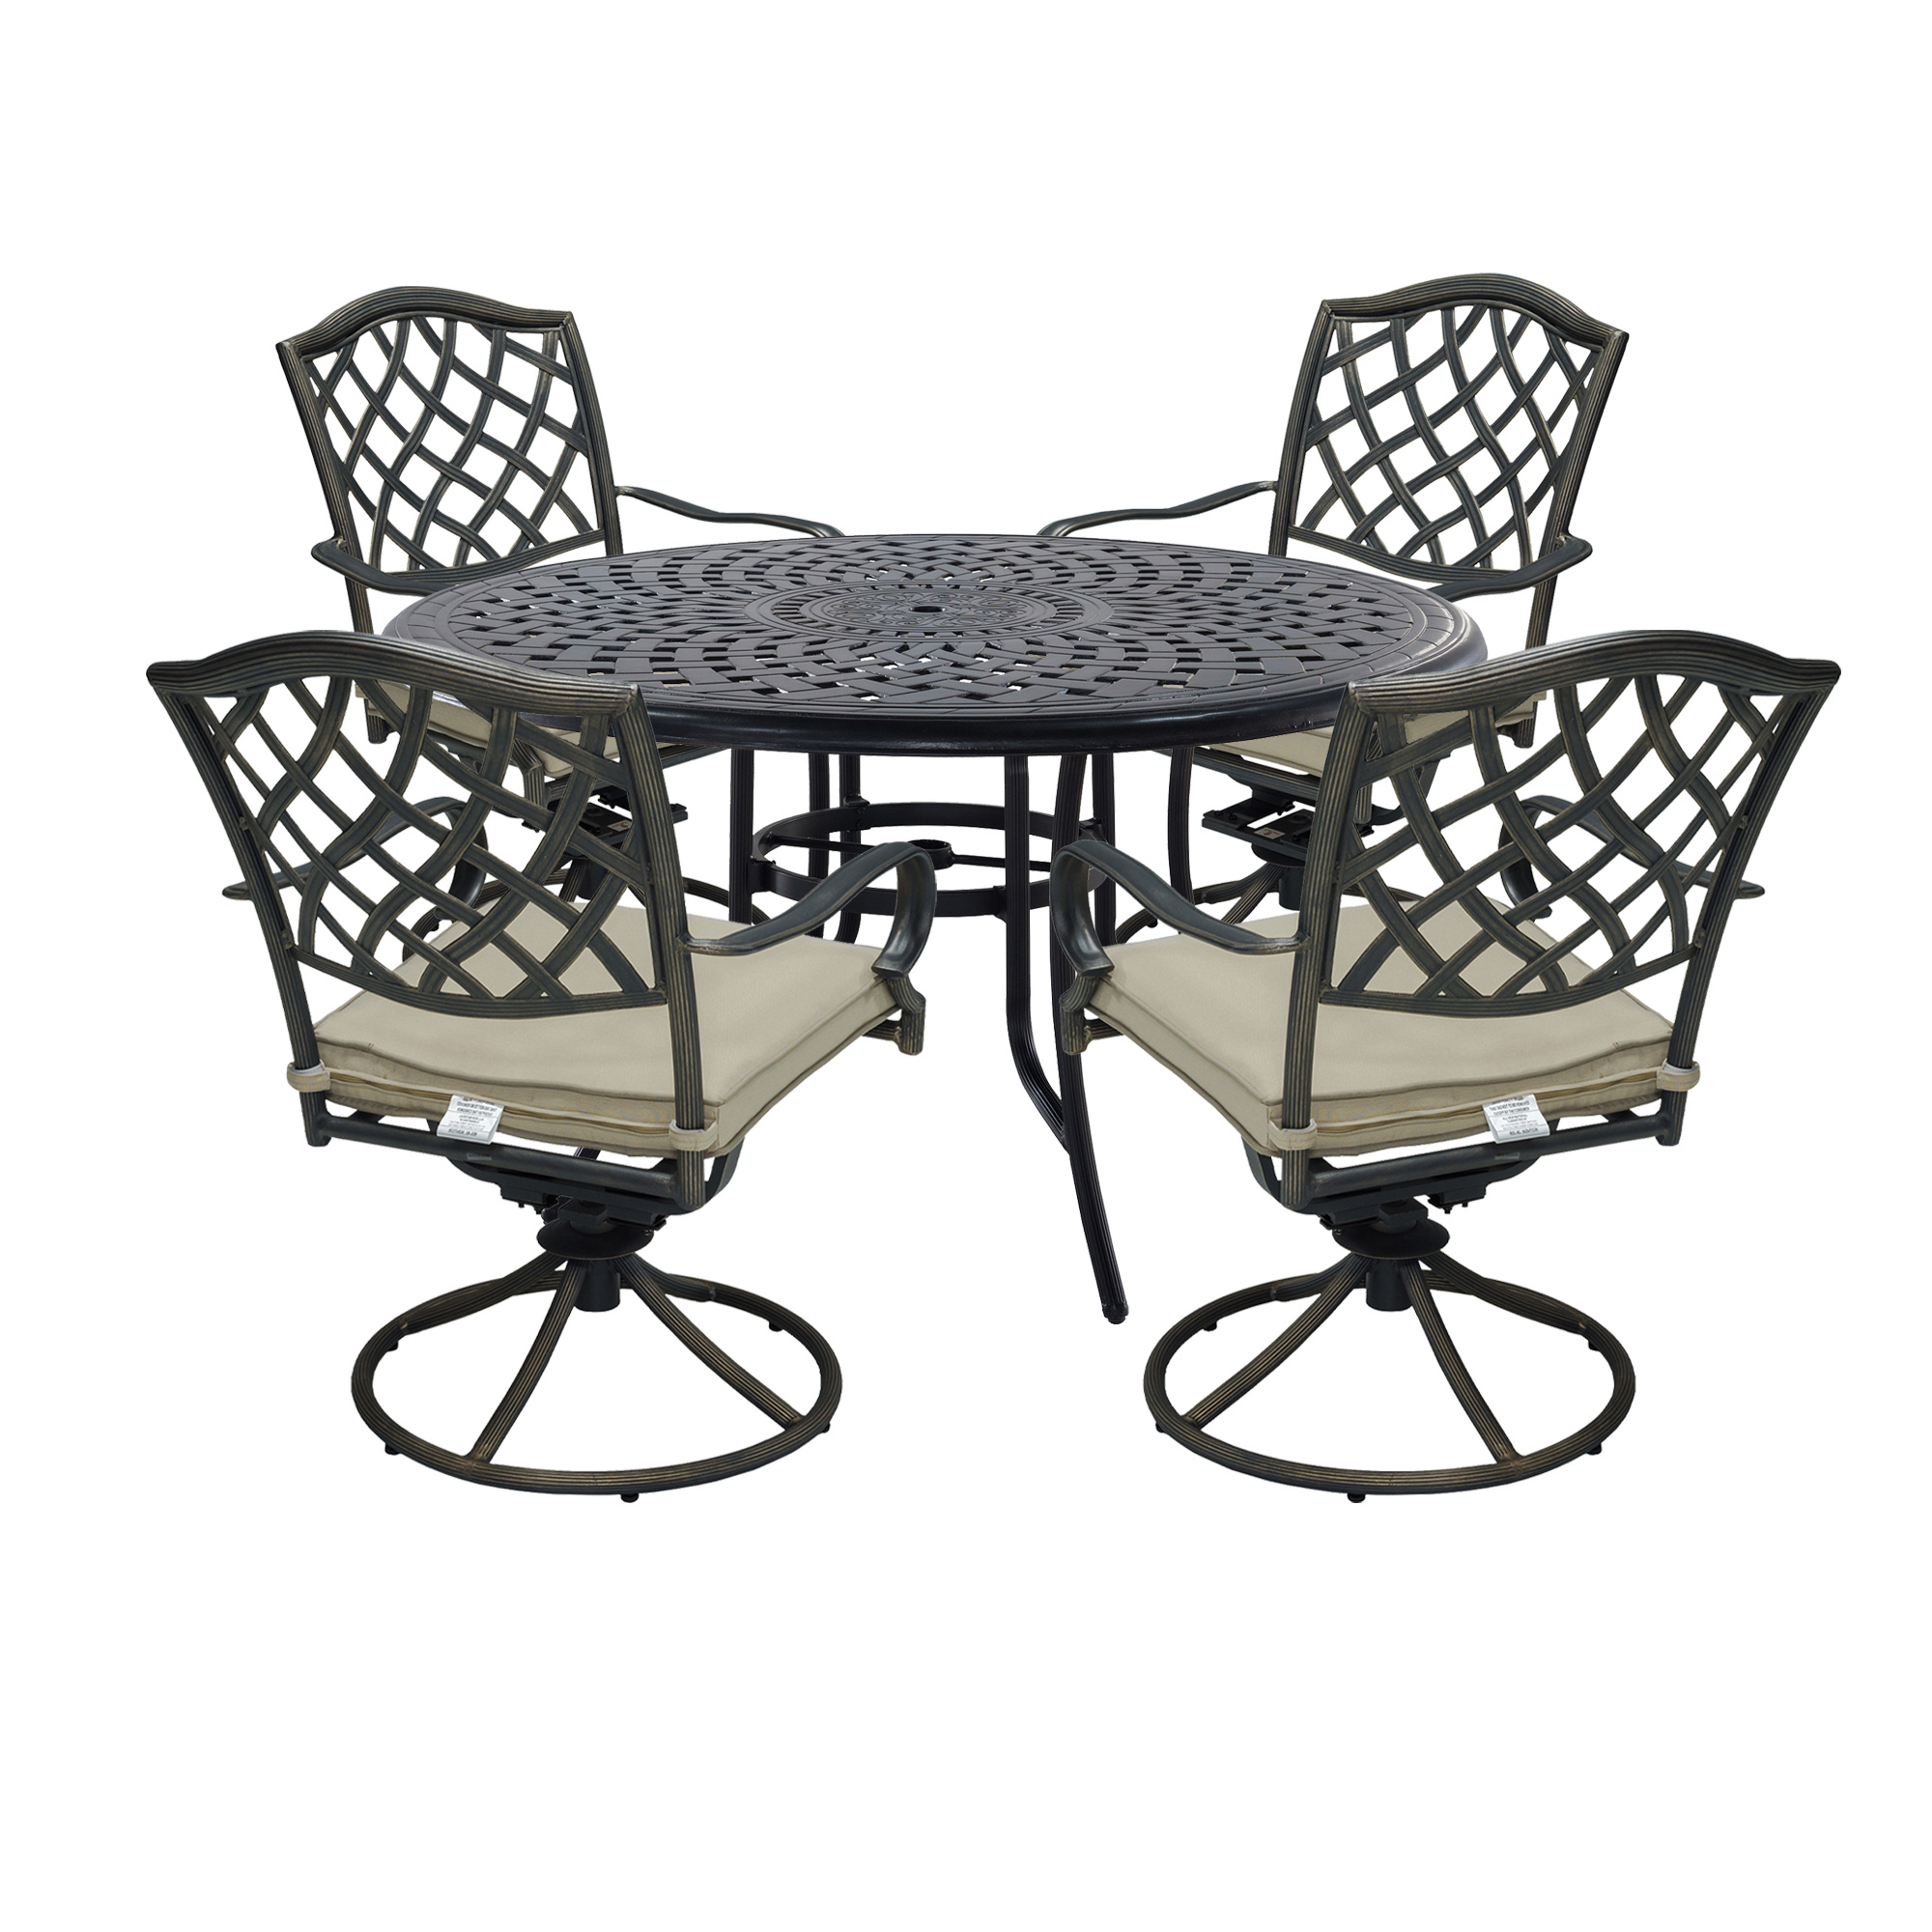 Cast Aluminum 5-Piece Outdoor Patio Dining Set with Table and Swivel Chairs